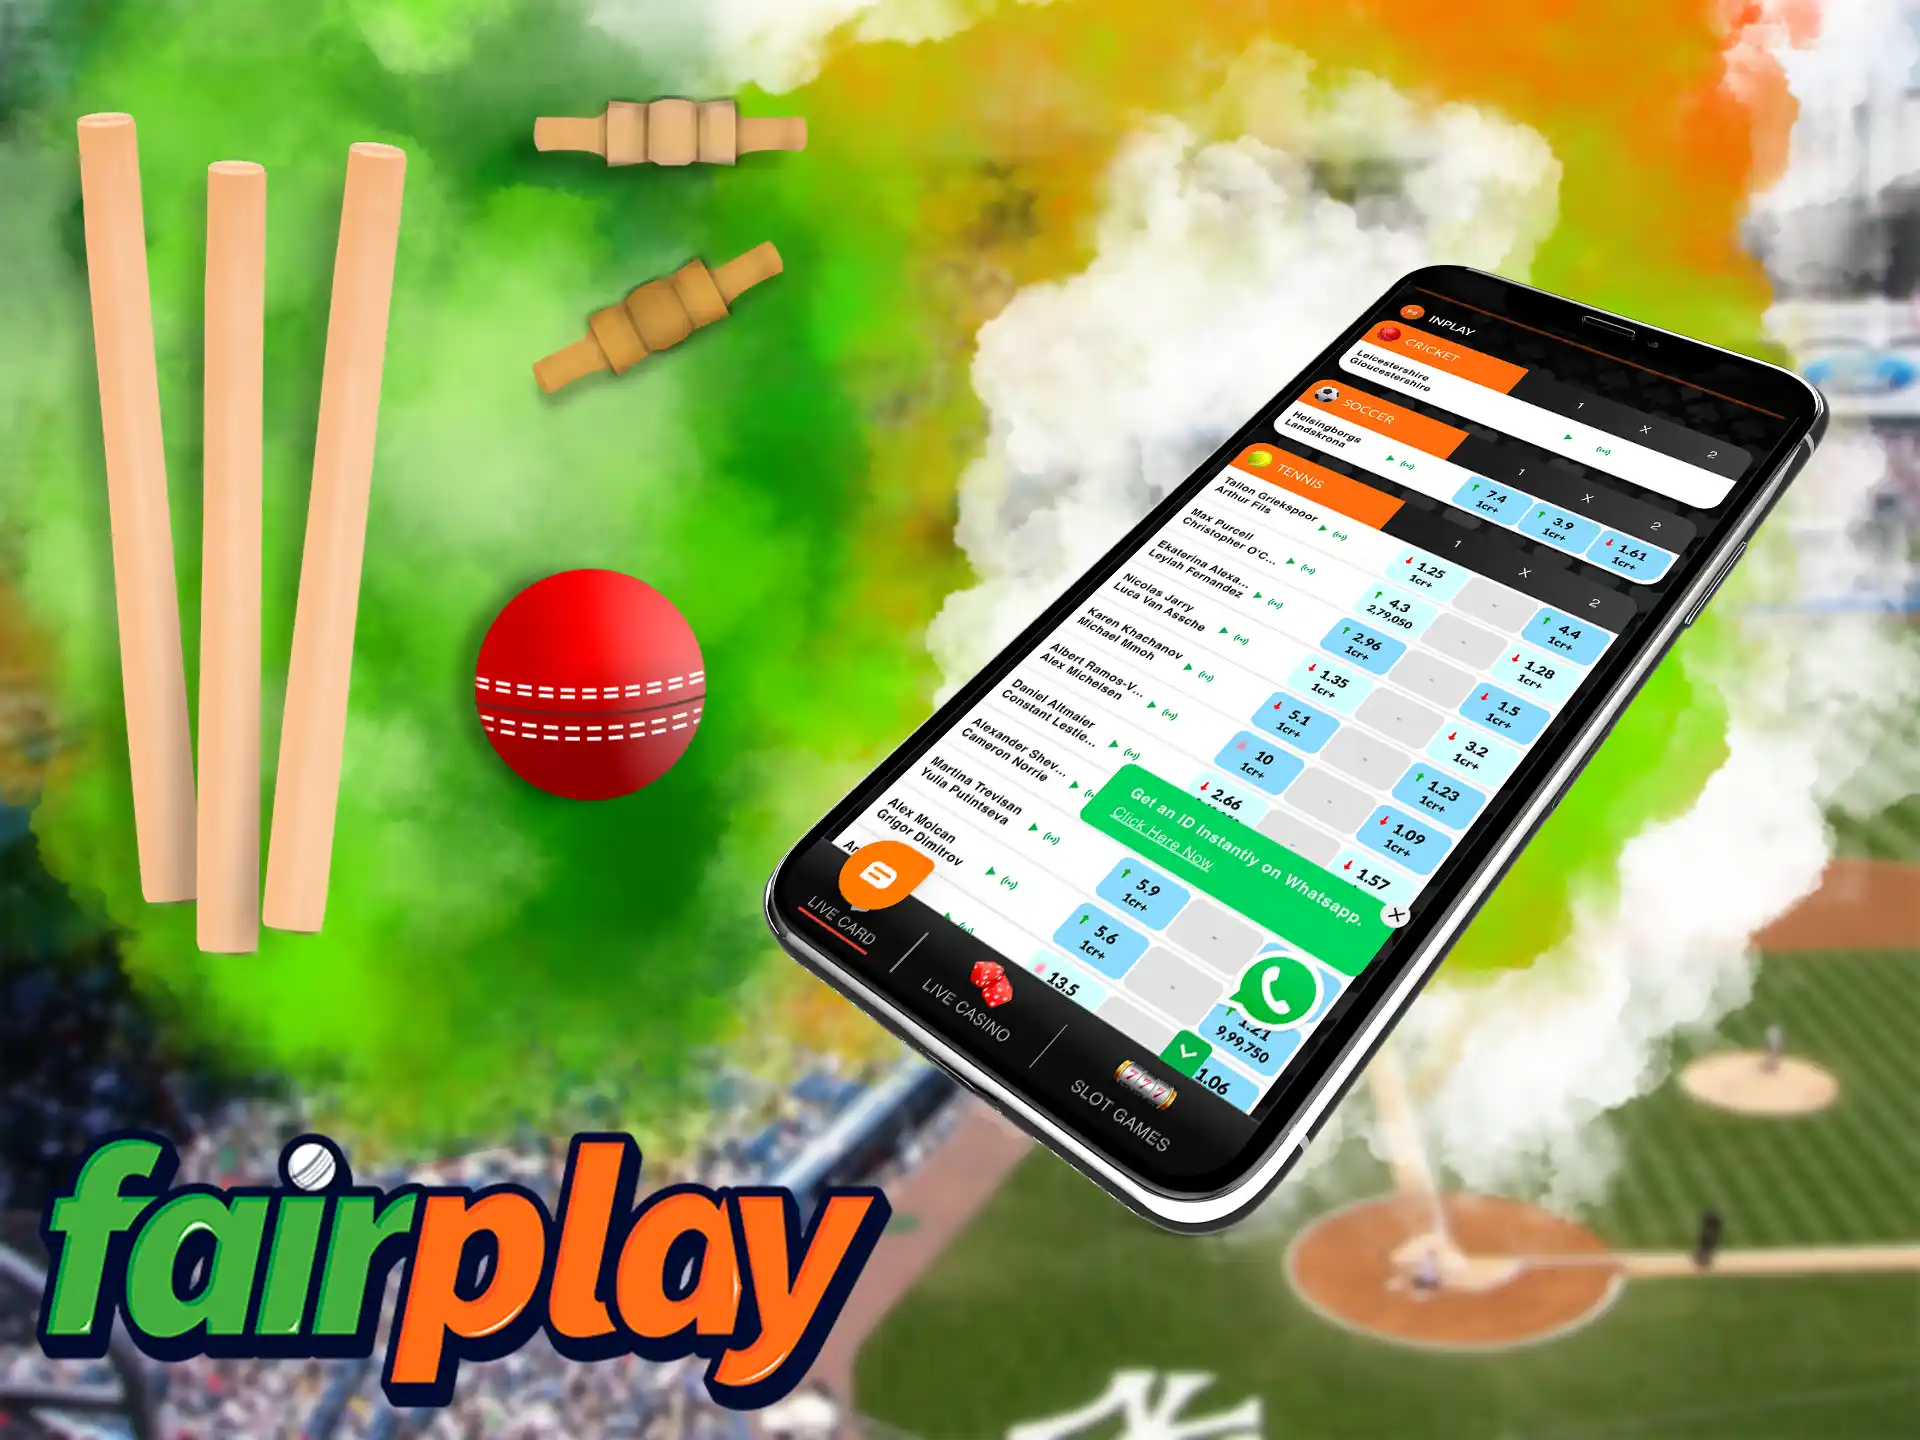 Players get the opportunity to bet on India's most popular sport on the Fairplay platform, we tell you how to do it for maximum benefits.